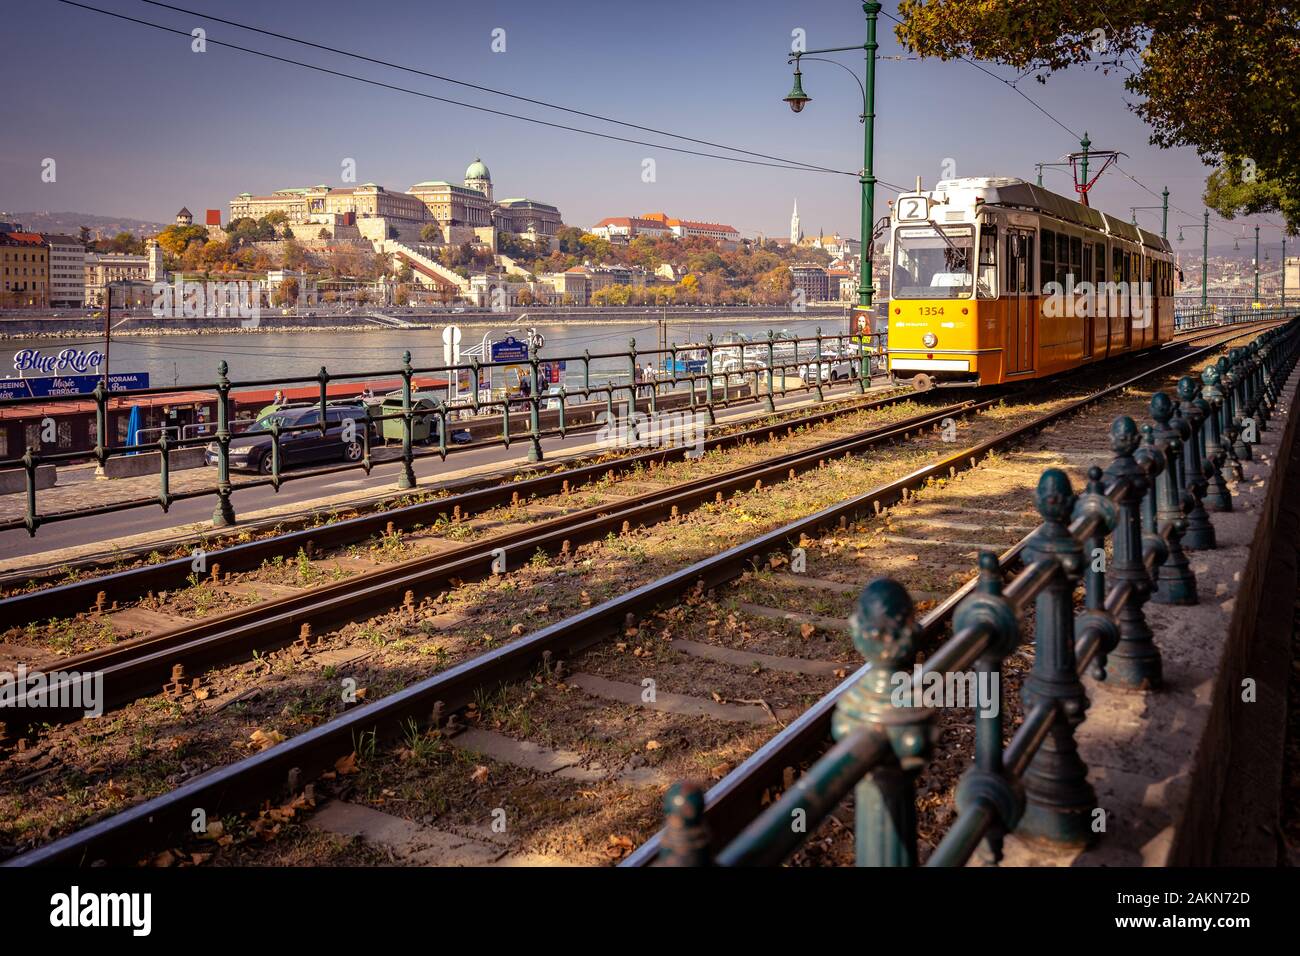 Budapest, Hungary - Local tram riding along the river with Buda castle in the background Stock Photo